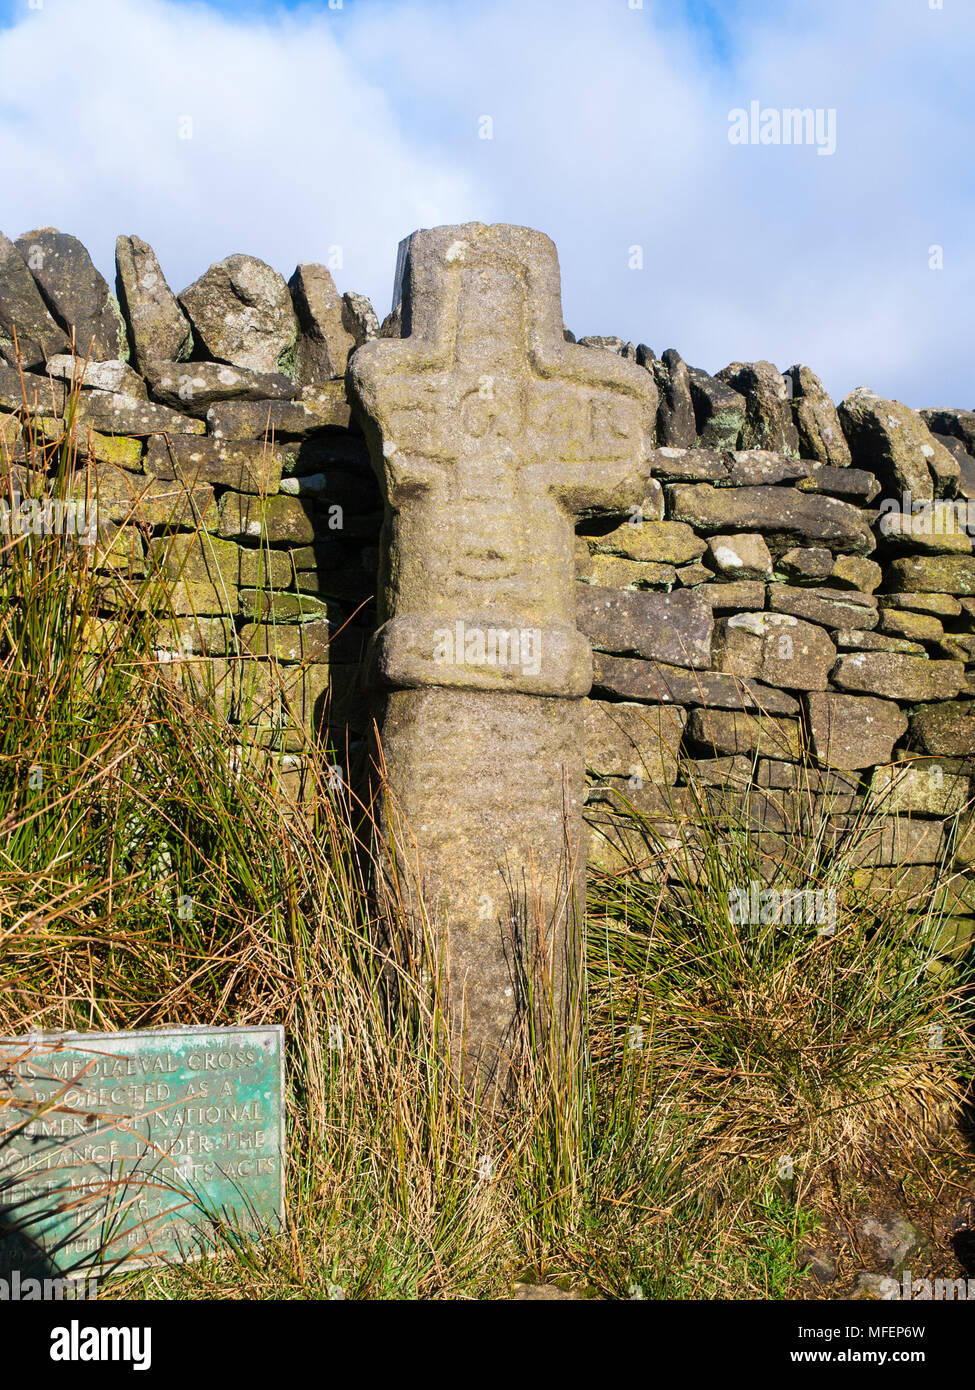 Edale Cross, a medieval wayside cross made of gritstone on the Jacob's Ladder path near Kinder Scout, Peak District National Park Stock Photo